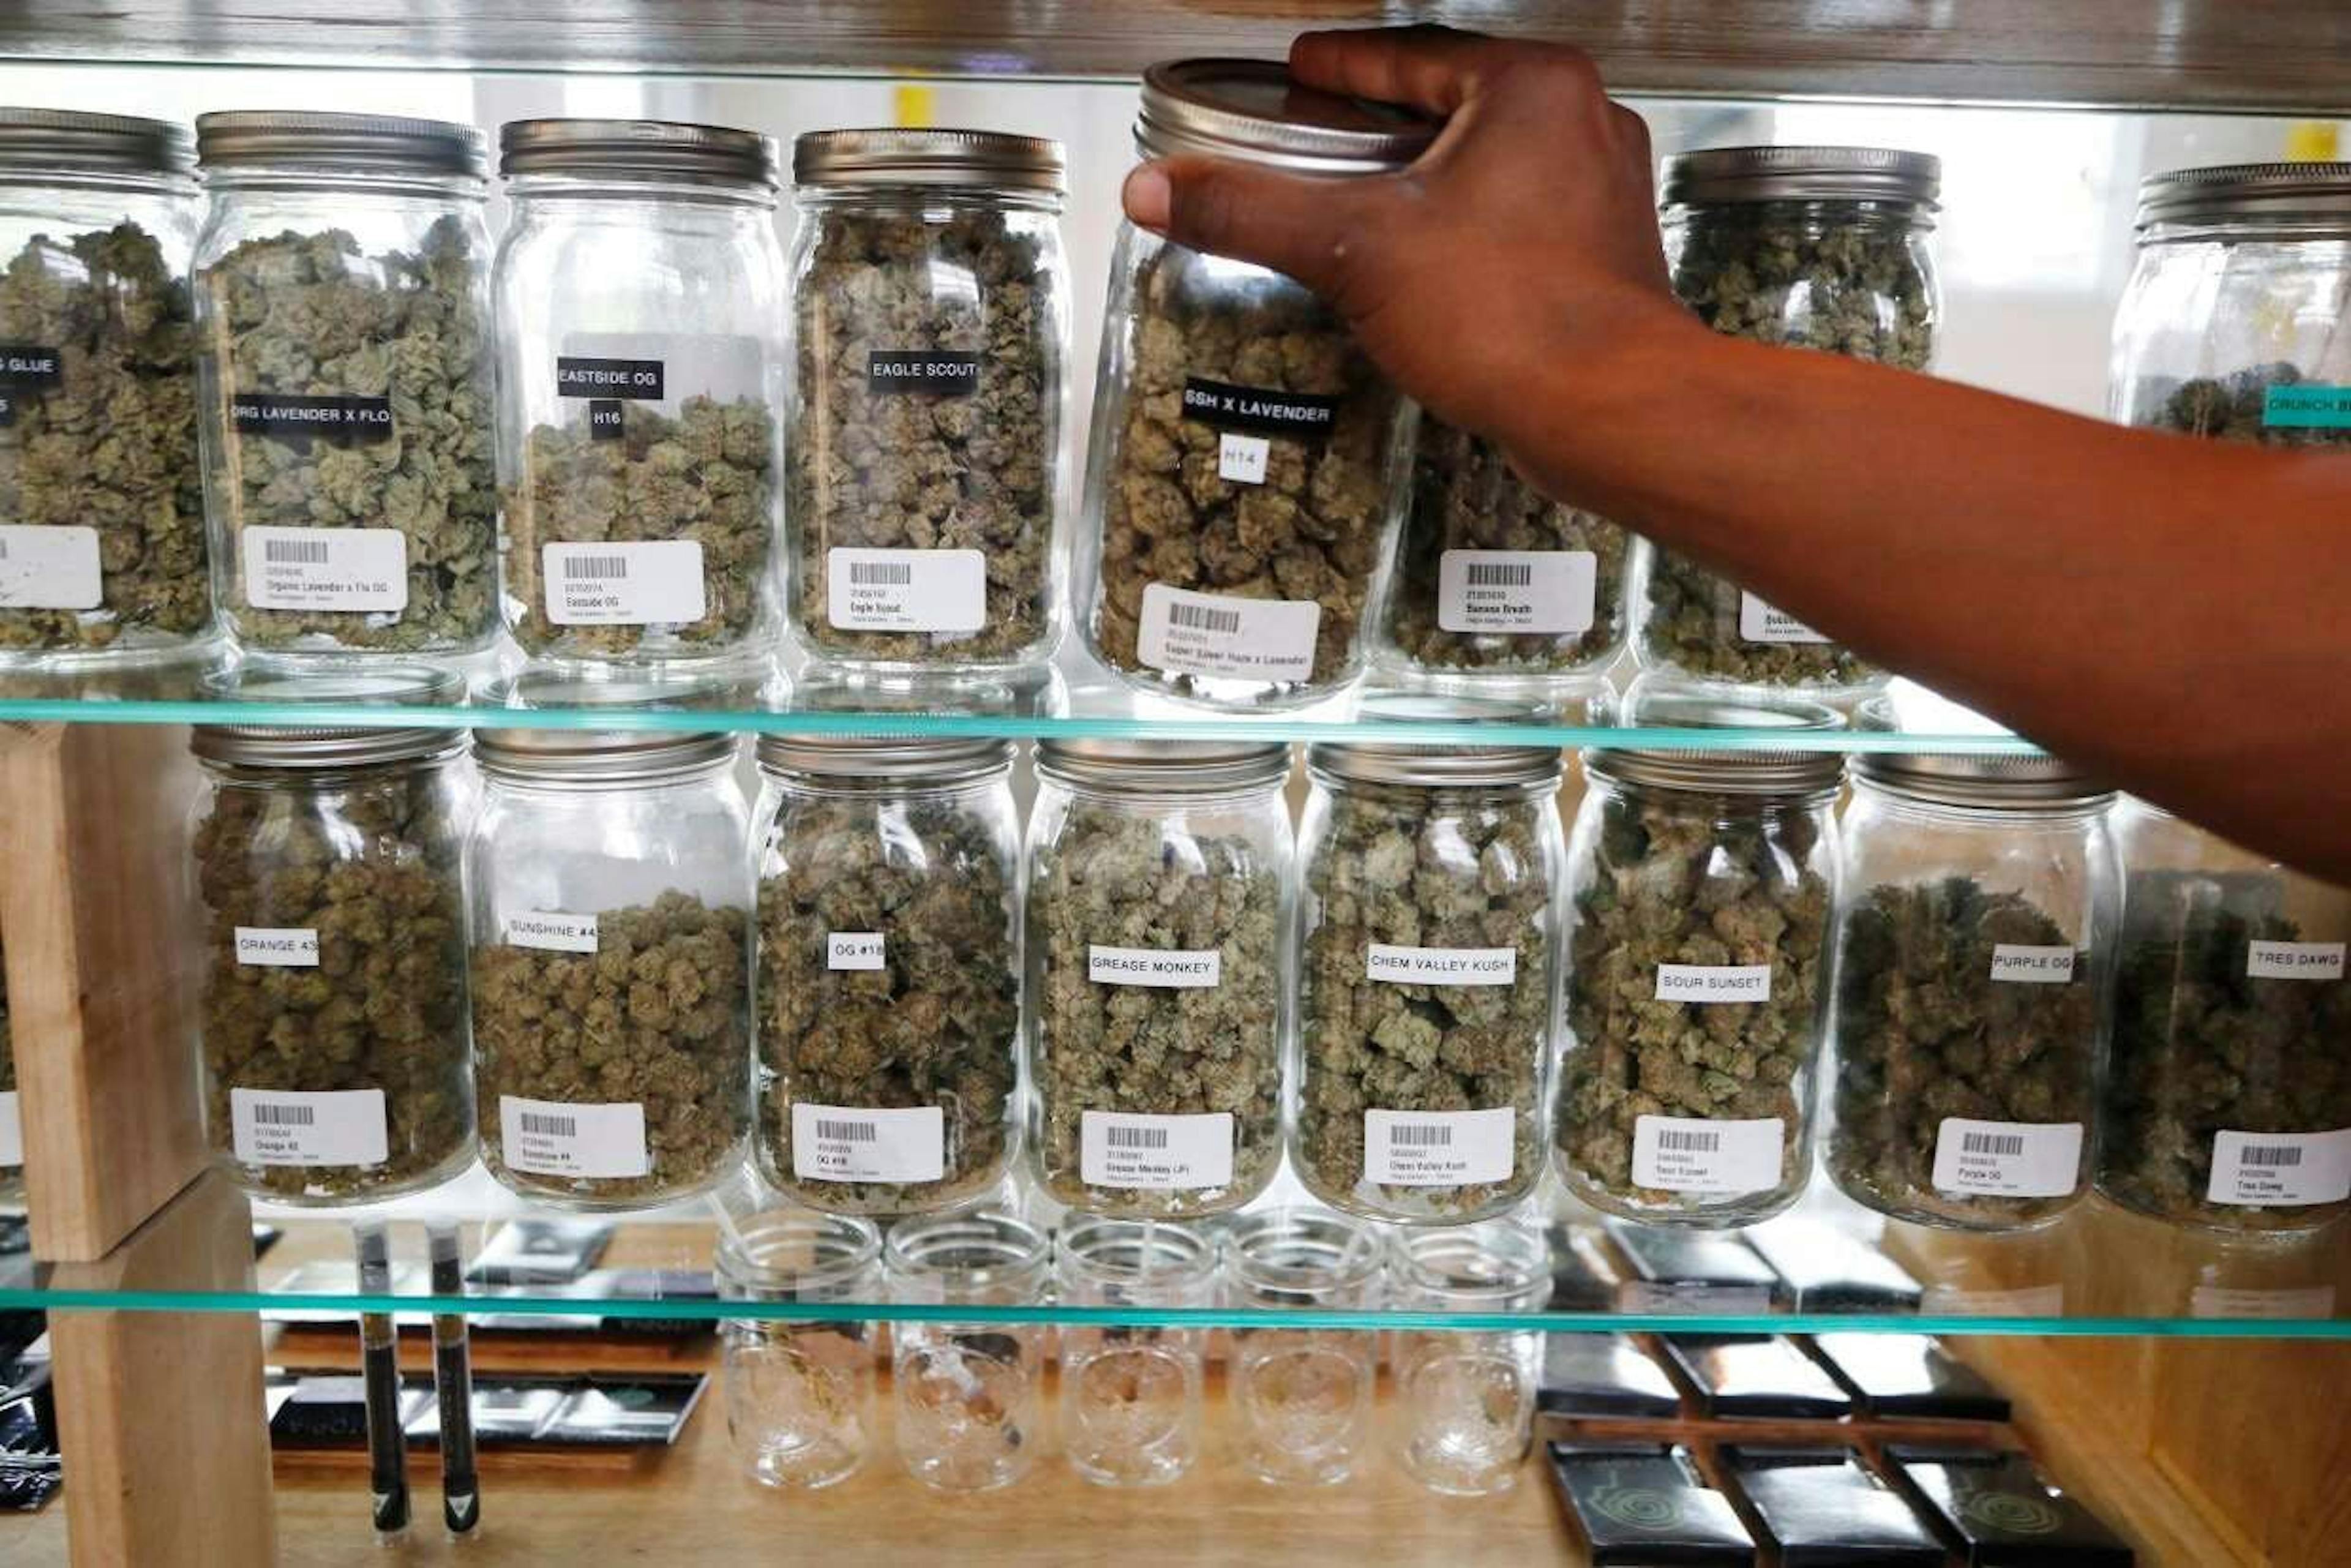 Government can block businesses from selling semi-legal goods like marijuana. Source: NBCNews.com